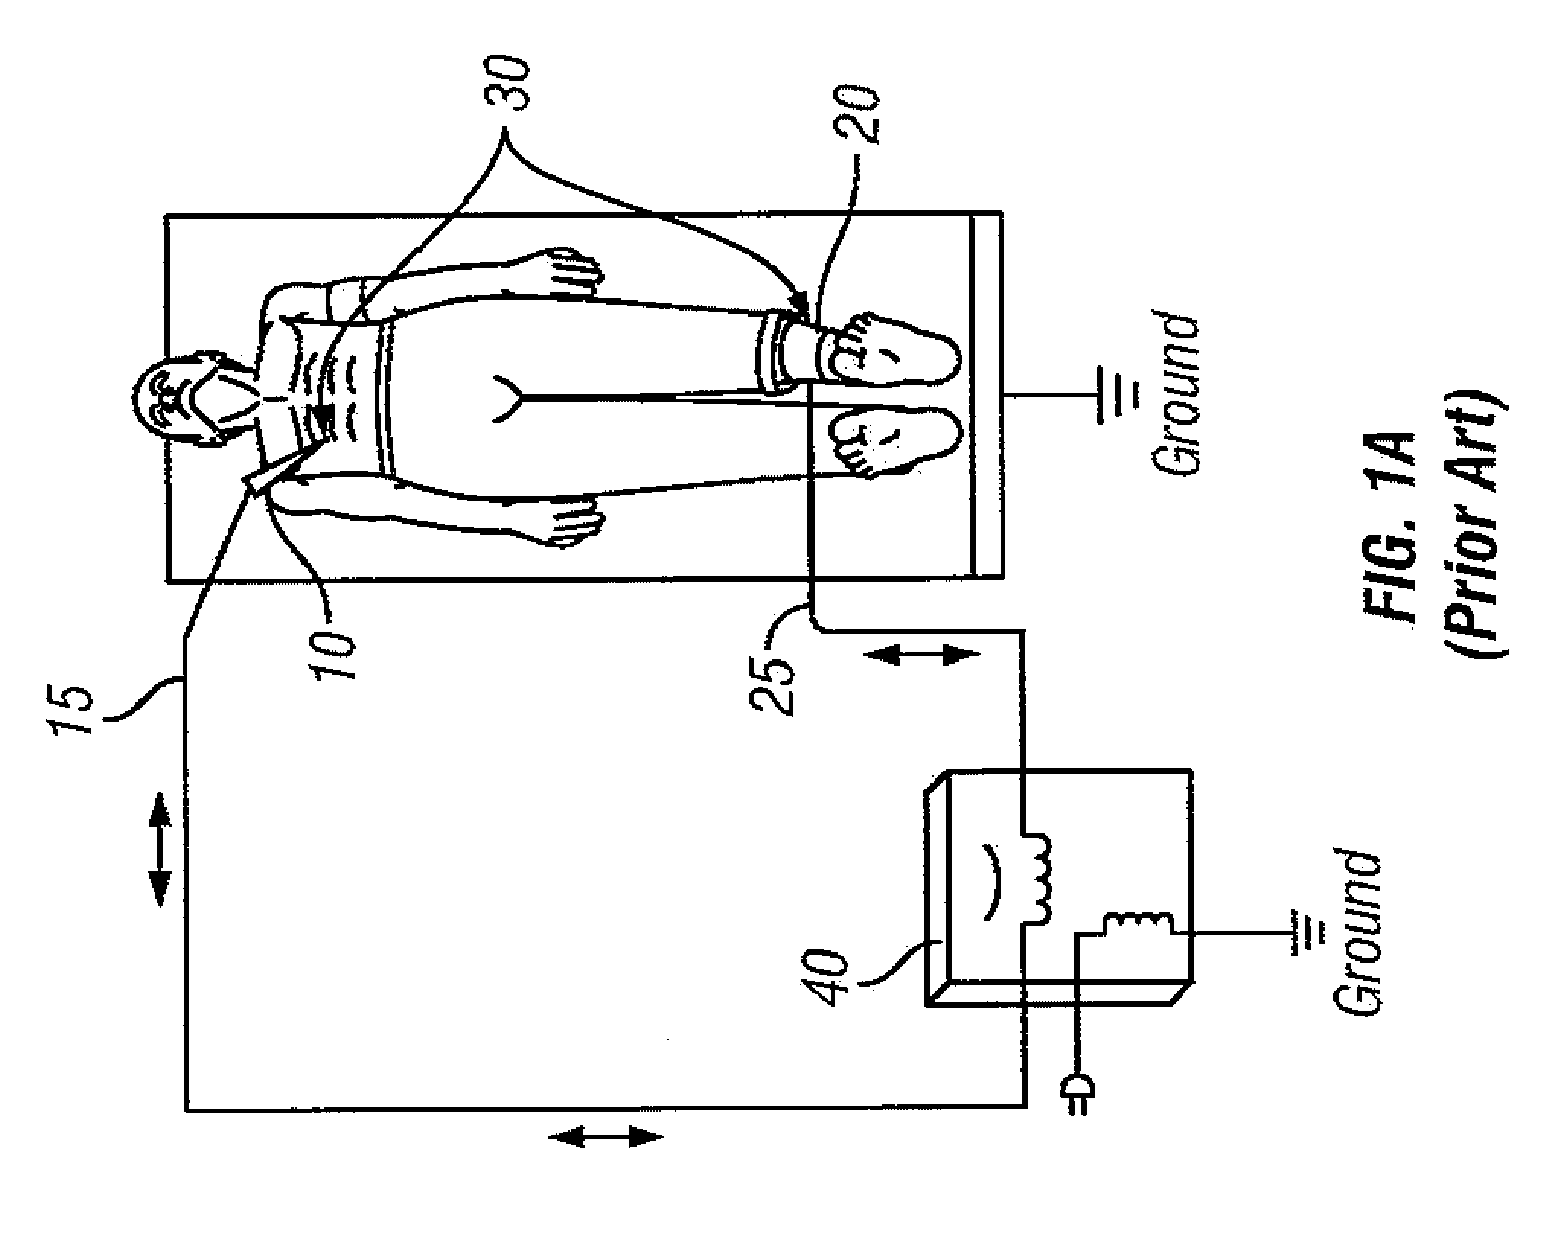 Connection of a bipolar electrosurgical hand piece to a monopolar output of an electrosurgical generator